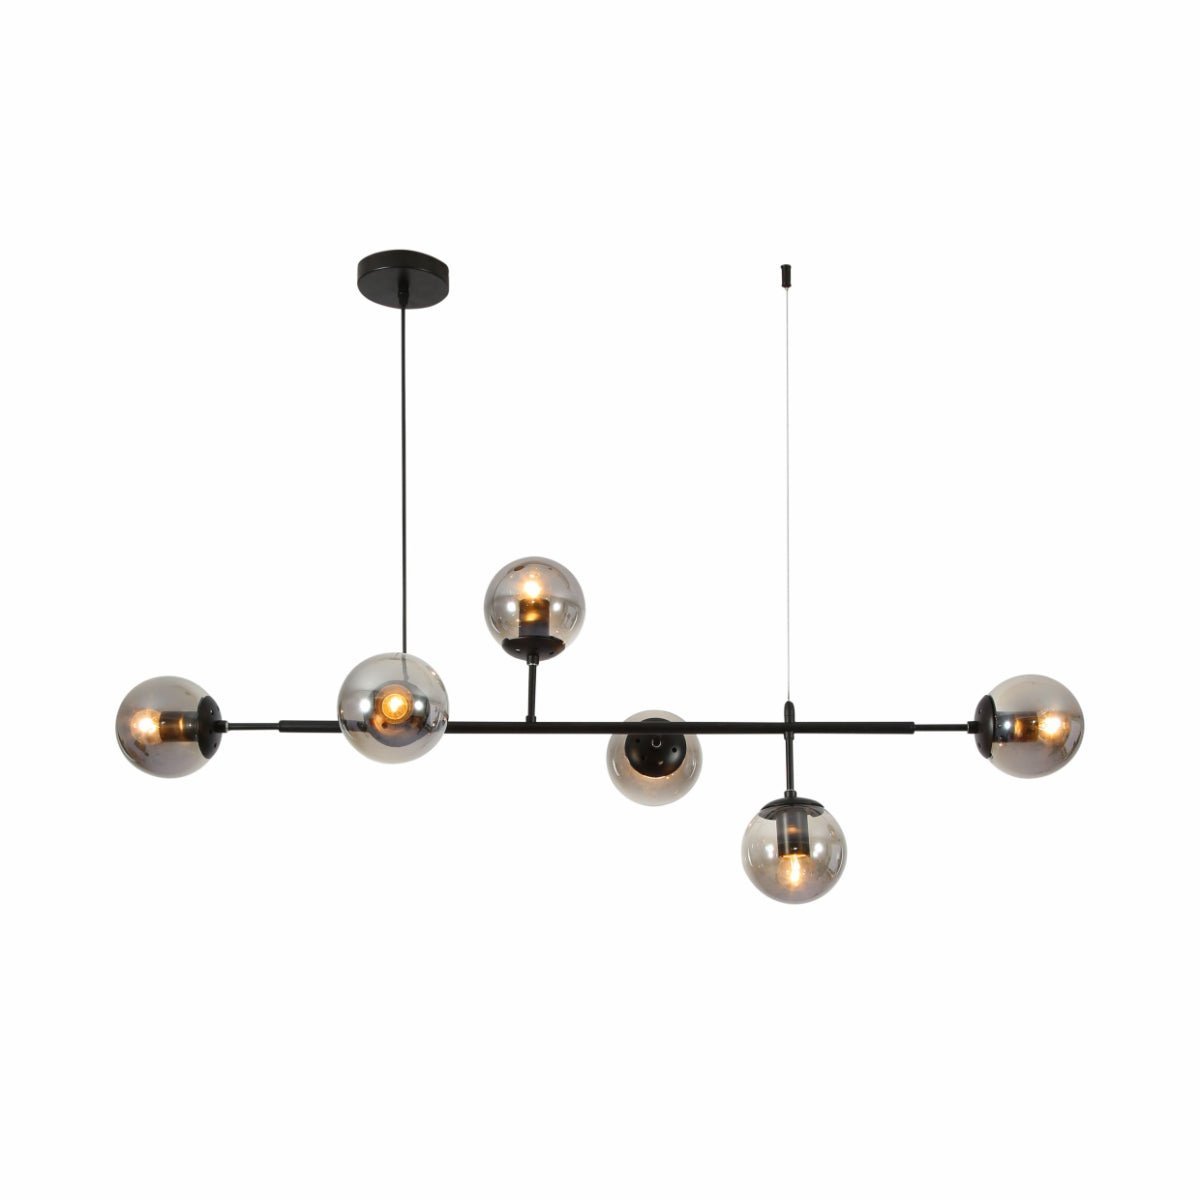 Main image of Smoky Globe Glass Black Metal Island Chandelier Ceiling Light with 6xE27 Fitting | TEKLED 159-17454